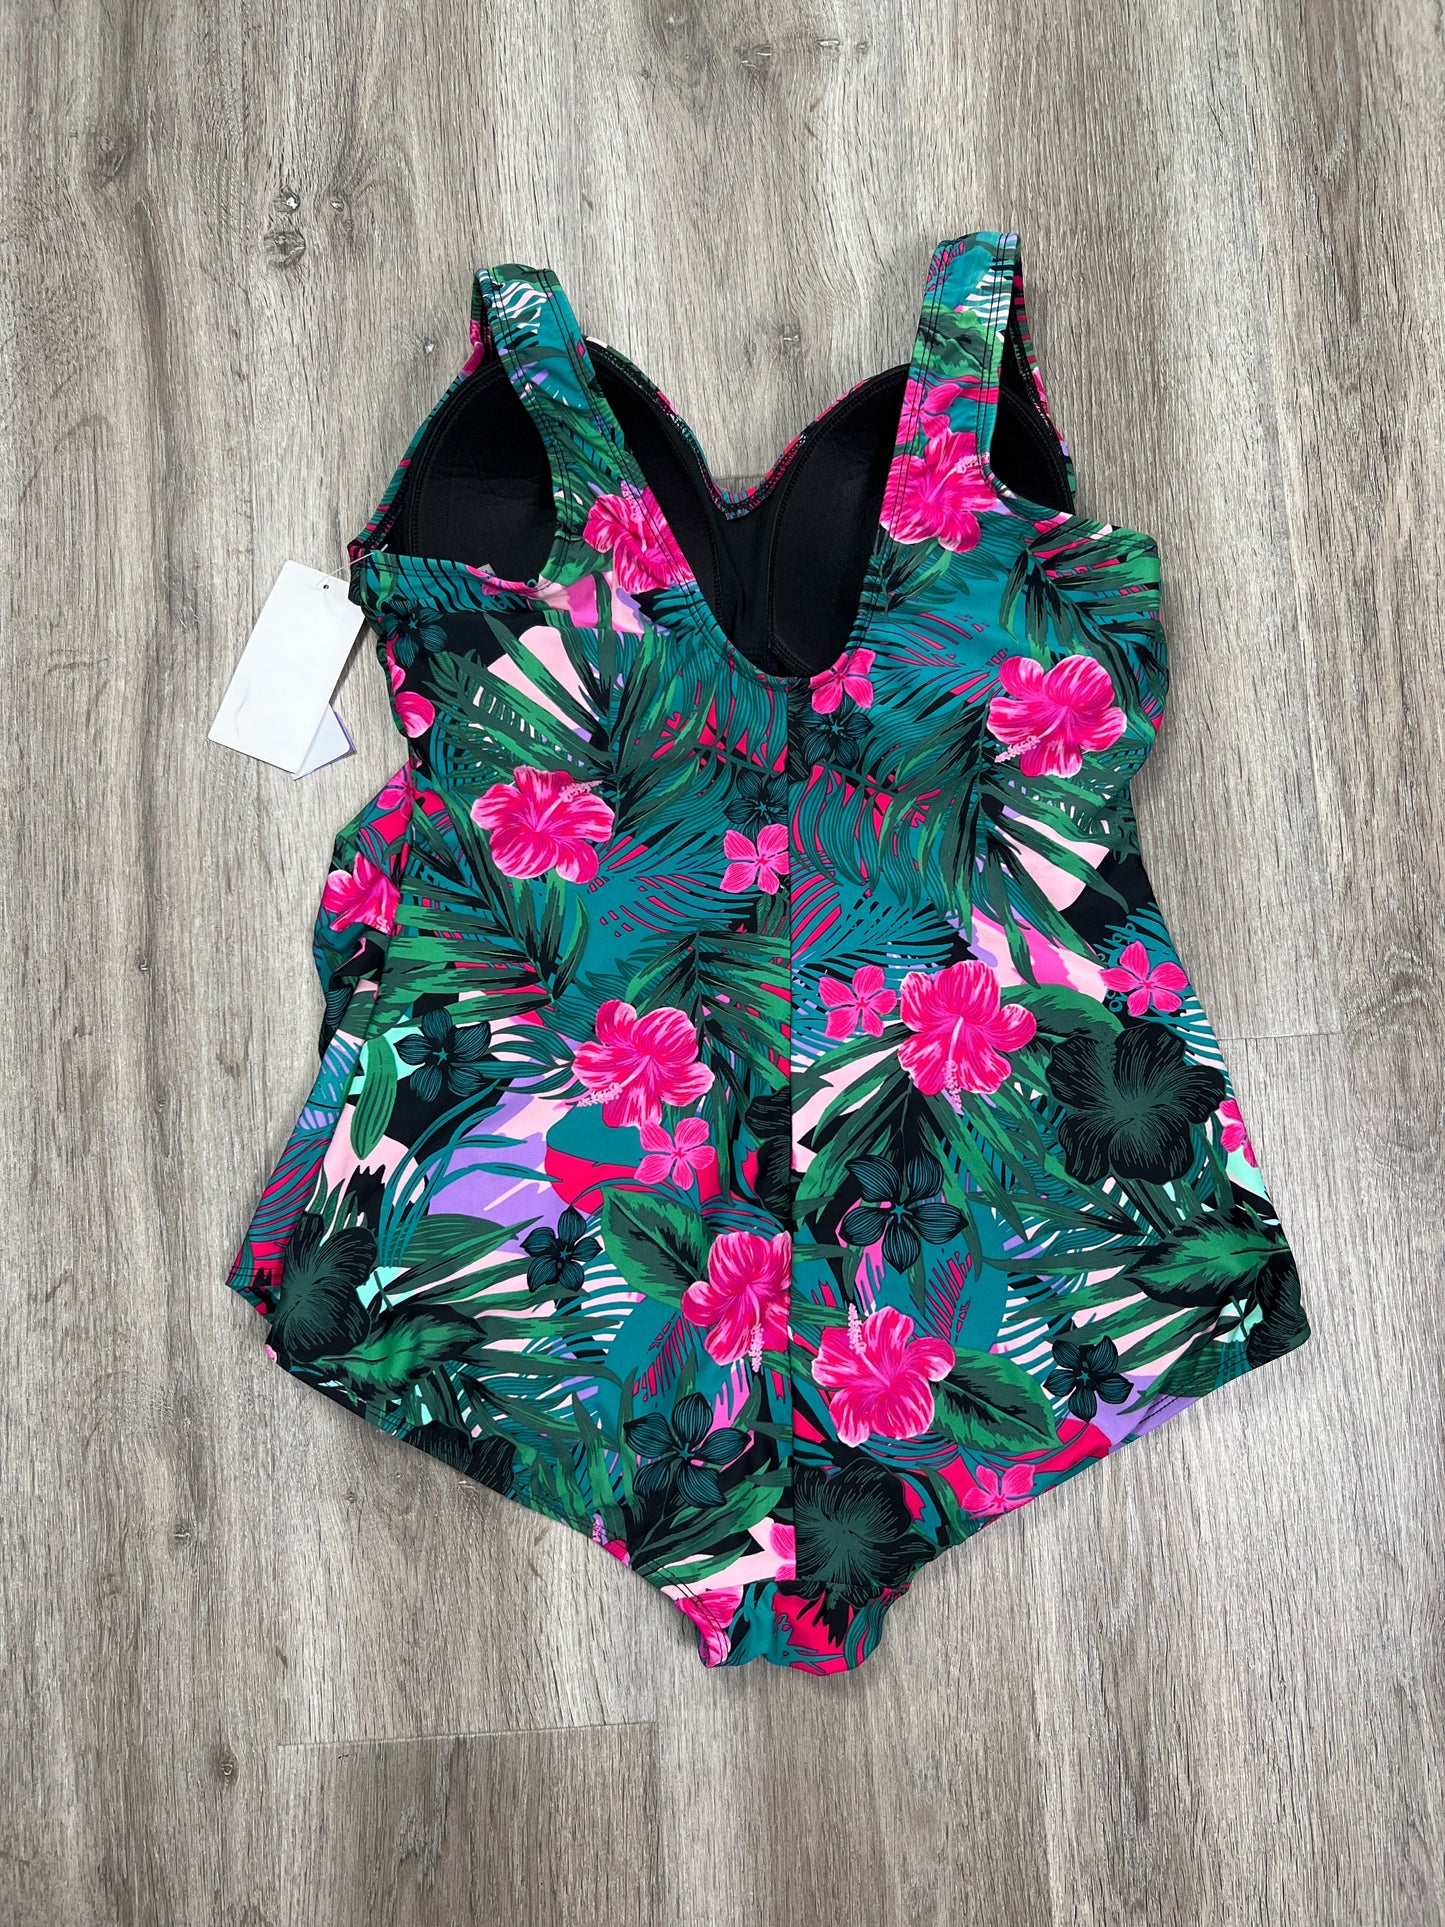 Floral Print Swimsuit Swimsuits for all, Size 2x